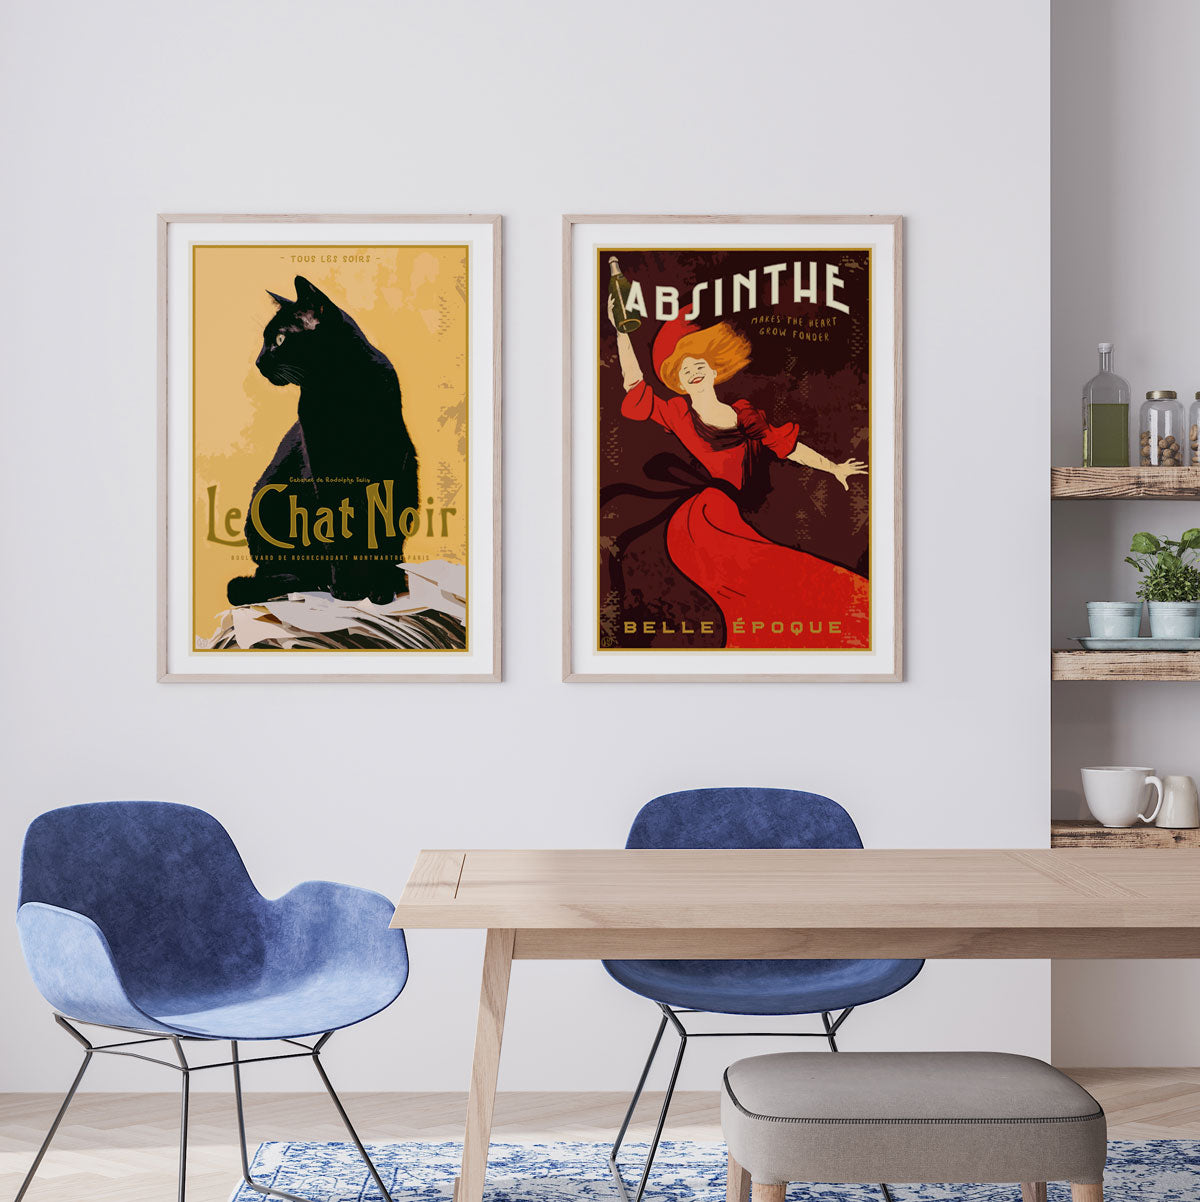 Pair up and save on vintage retro poster prints - by Places We Luv